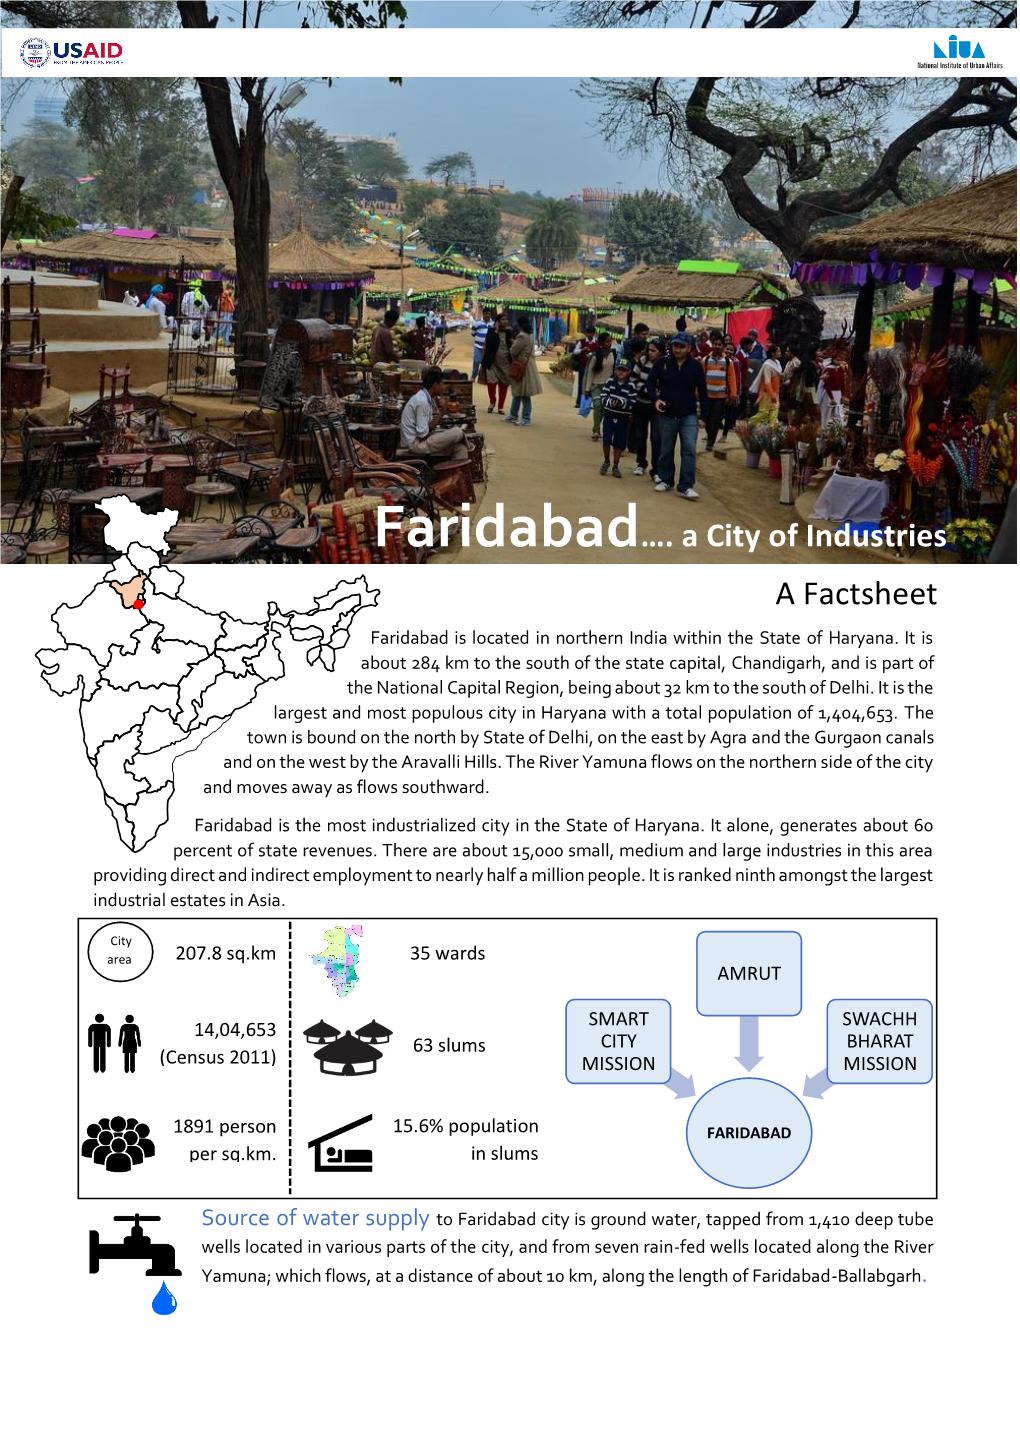 Faridabad…. a City of Industries